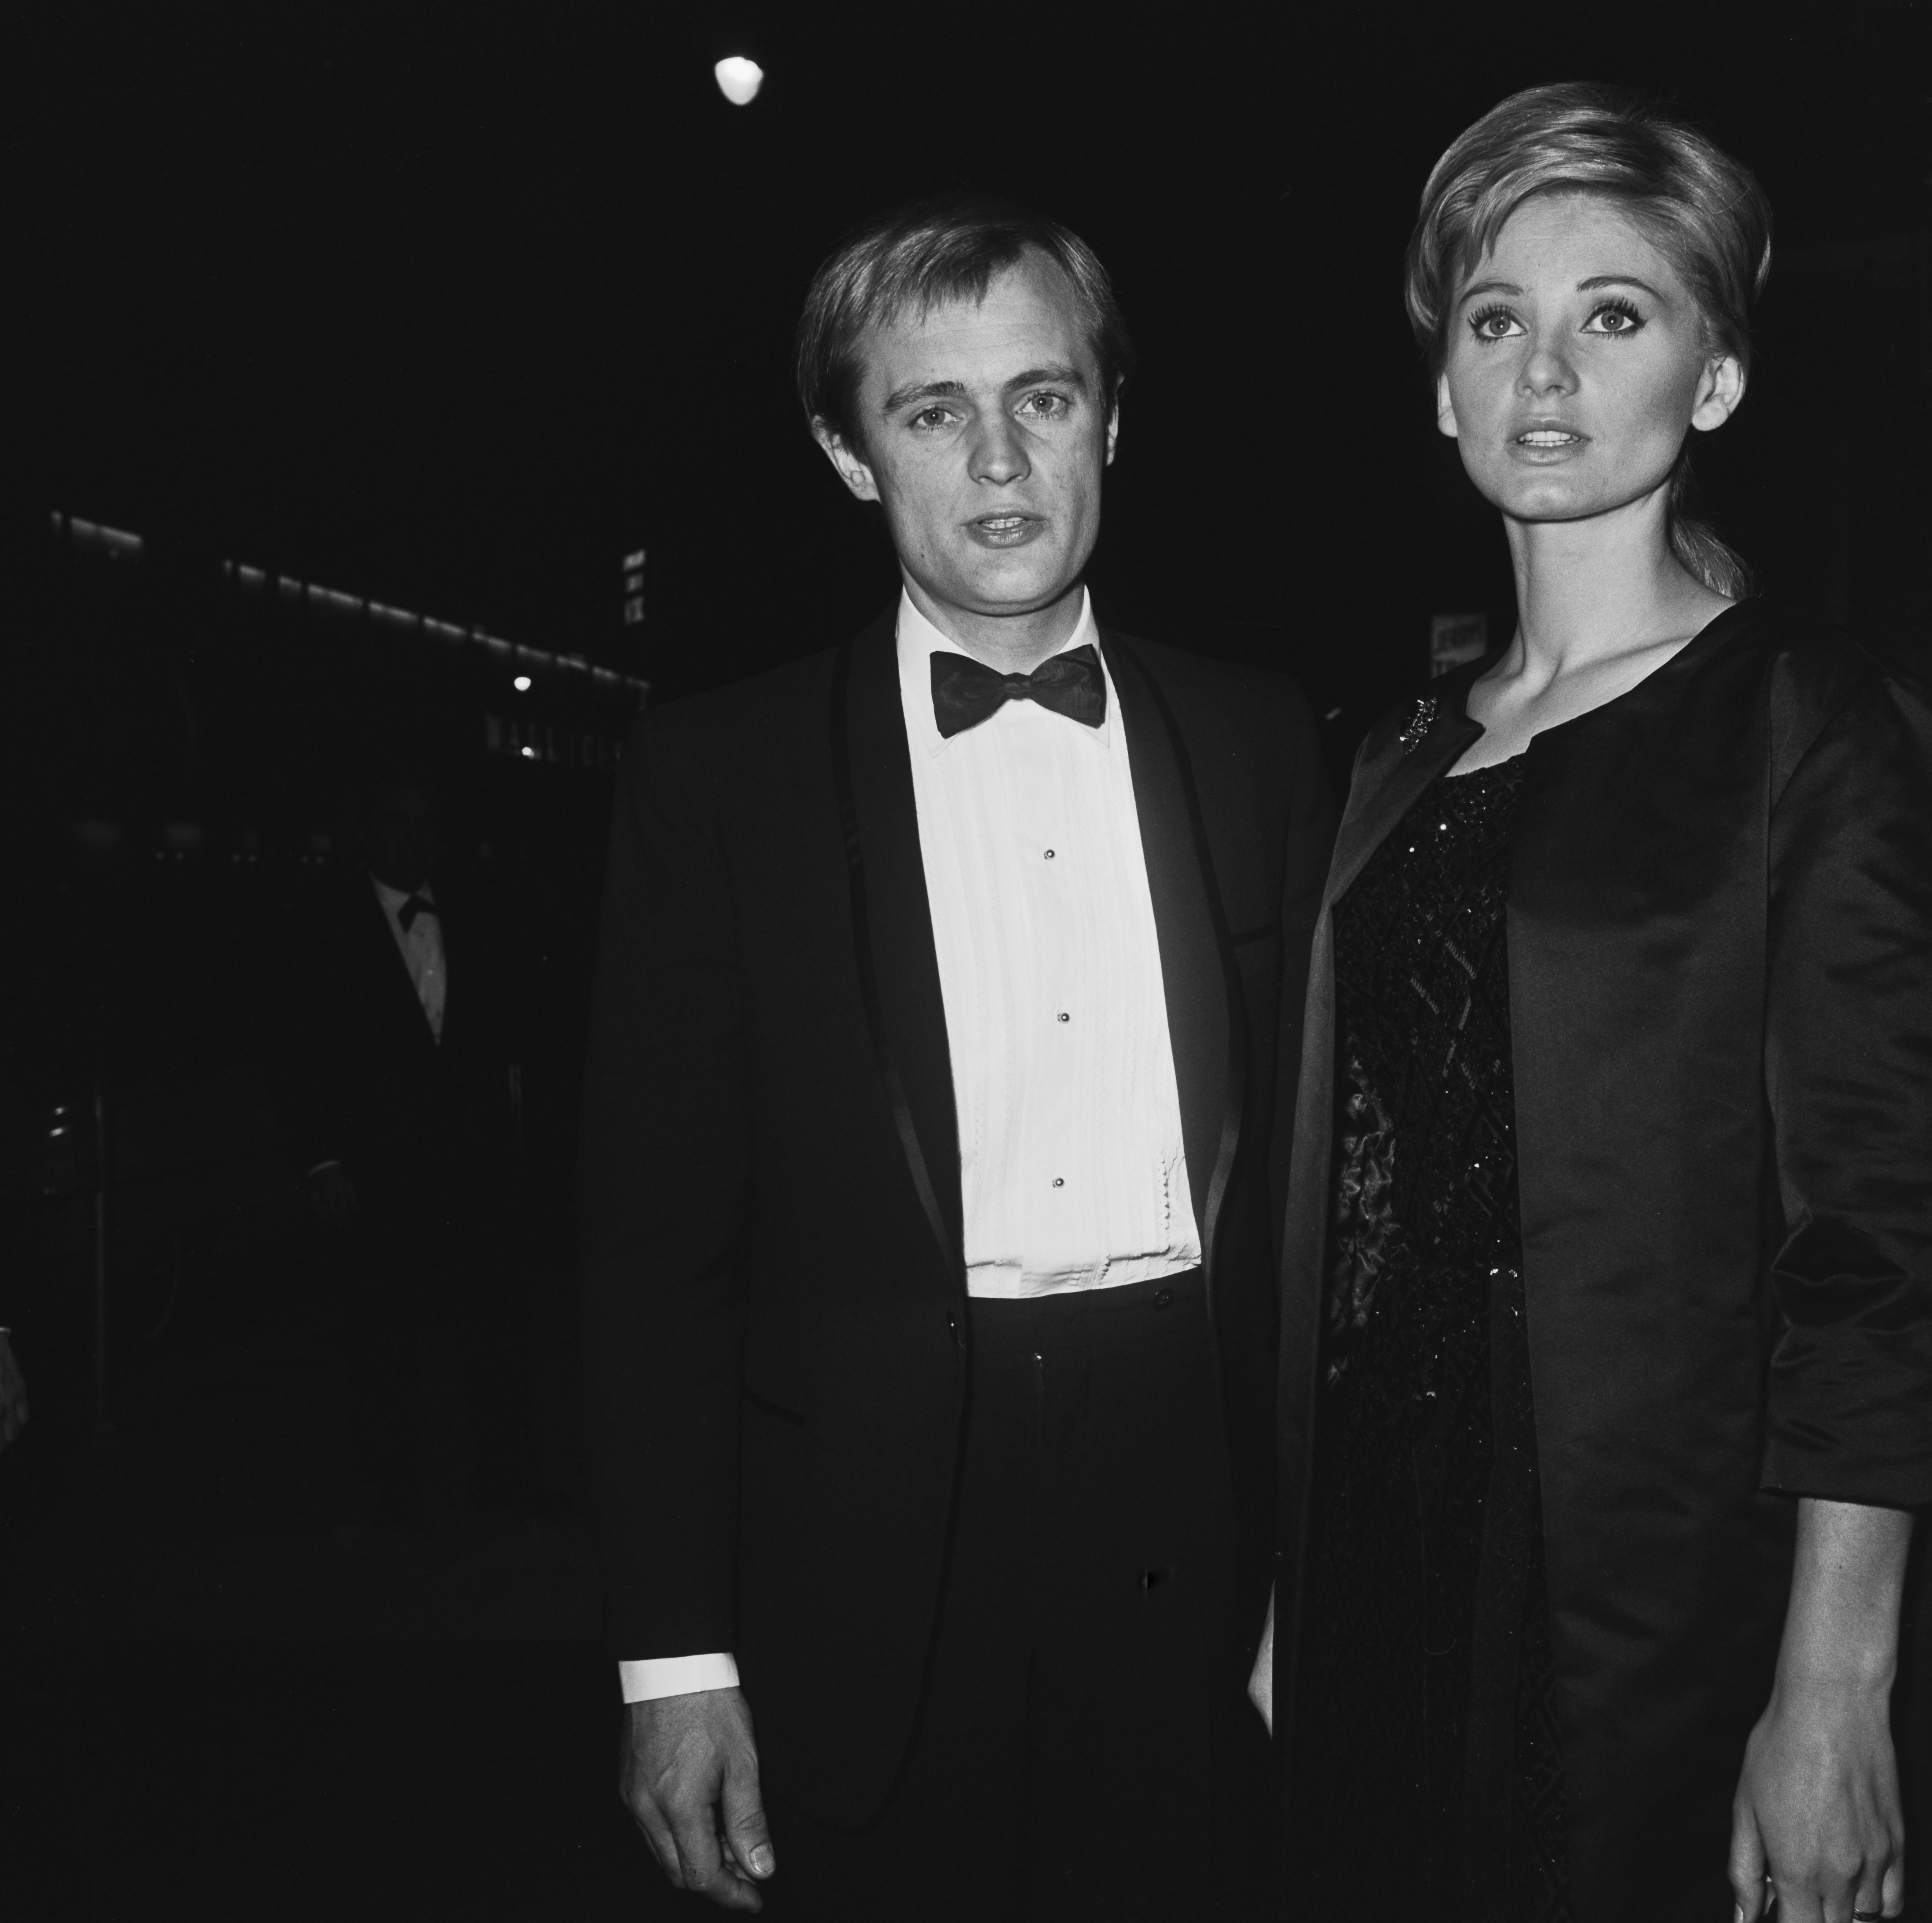 David McCallum and ex-wife Jill Ireland in the United States in 1965. | Source: Getty Images 